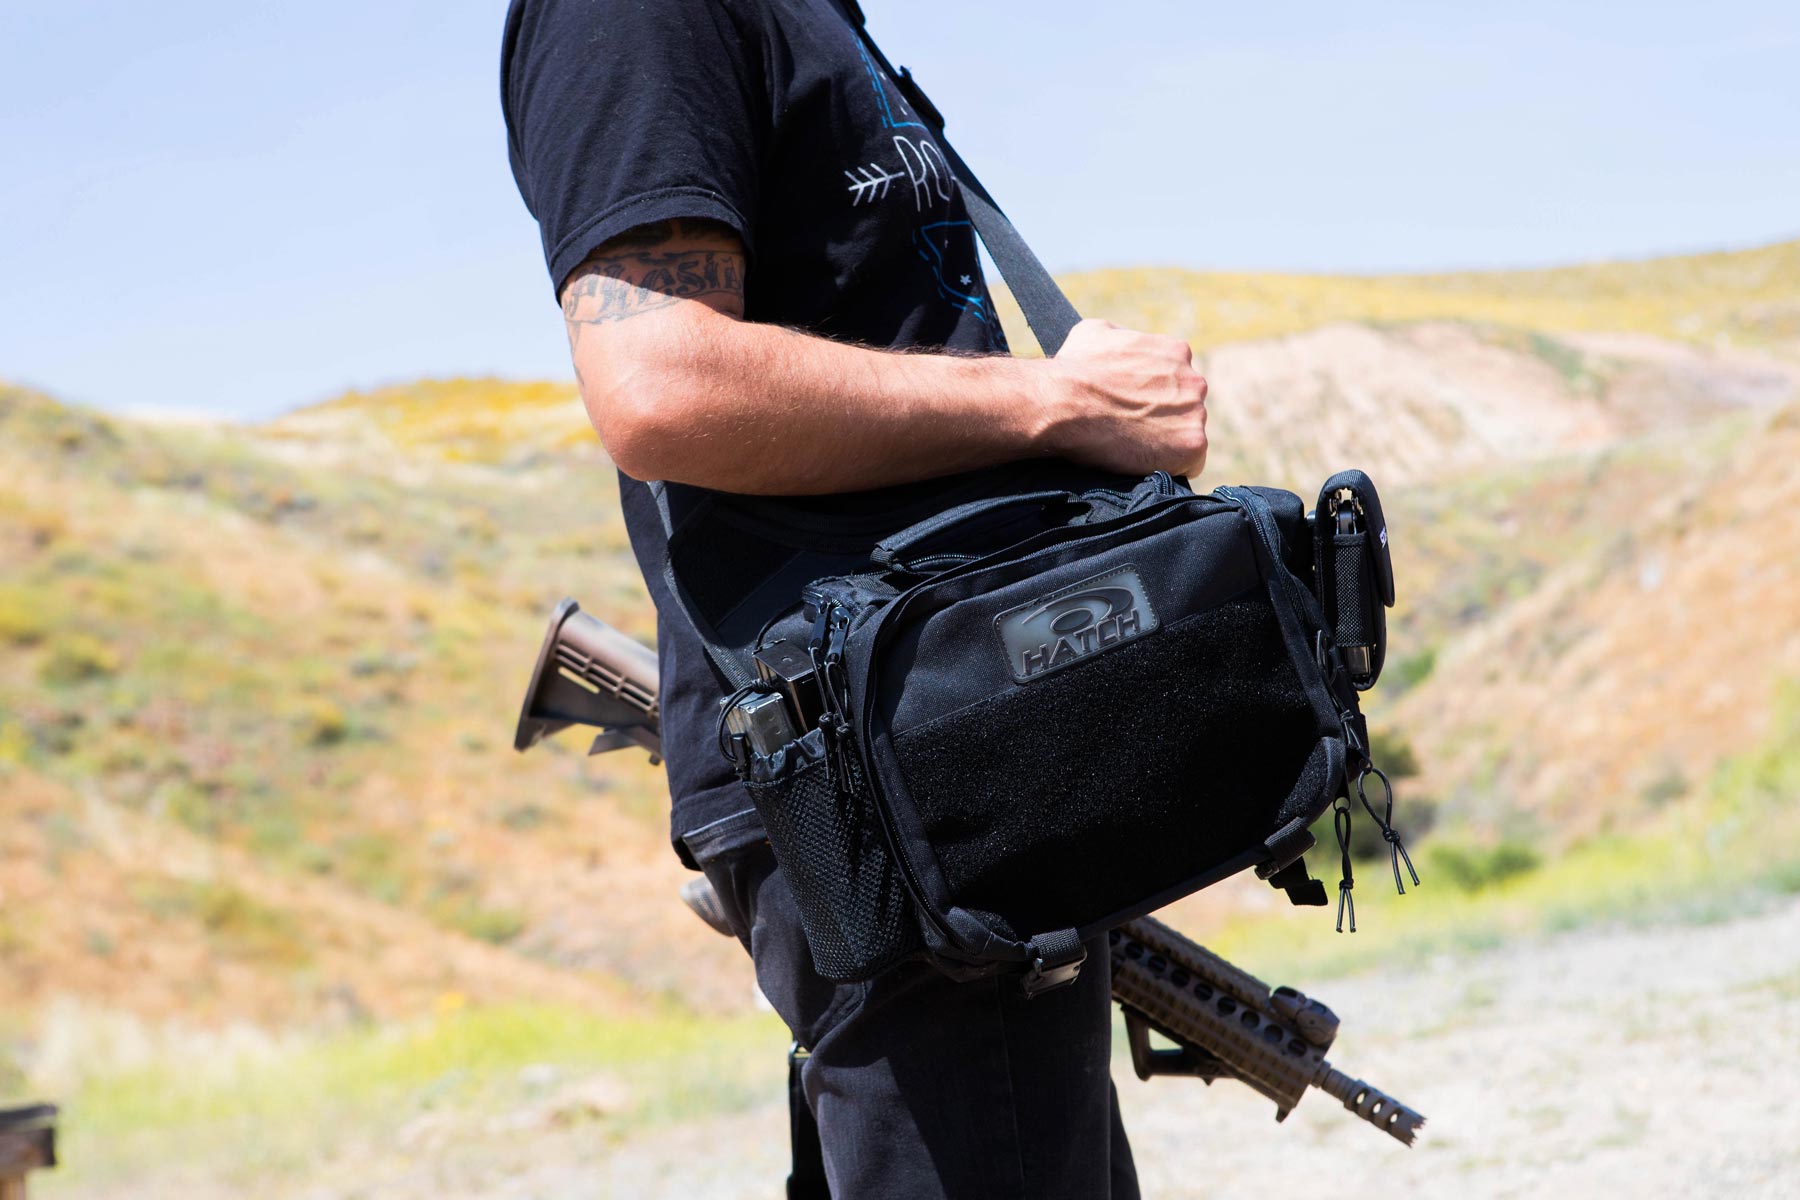 Safariland Hatch S7 Tactical Sling Pack - $24.99 (Free S/H over $75, excl. ammo)